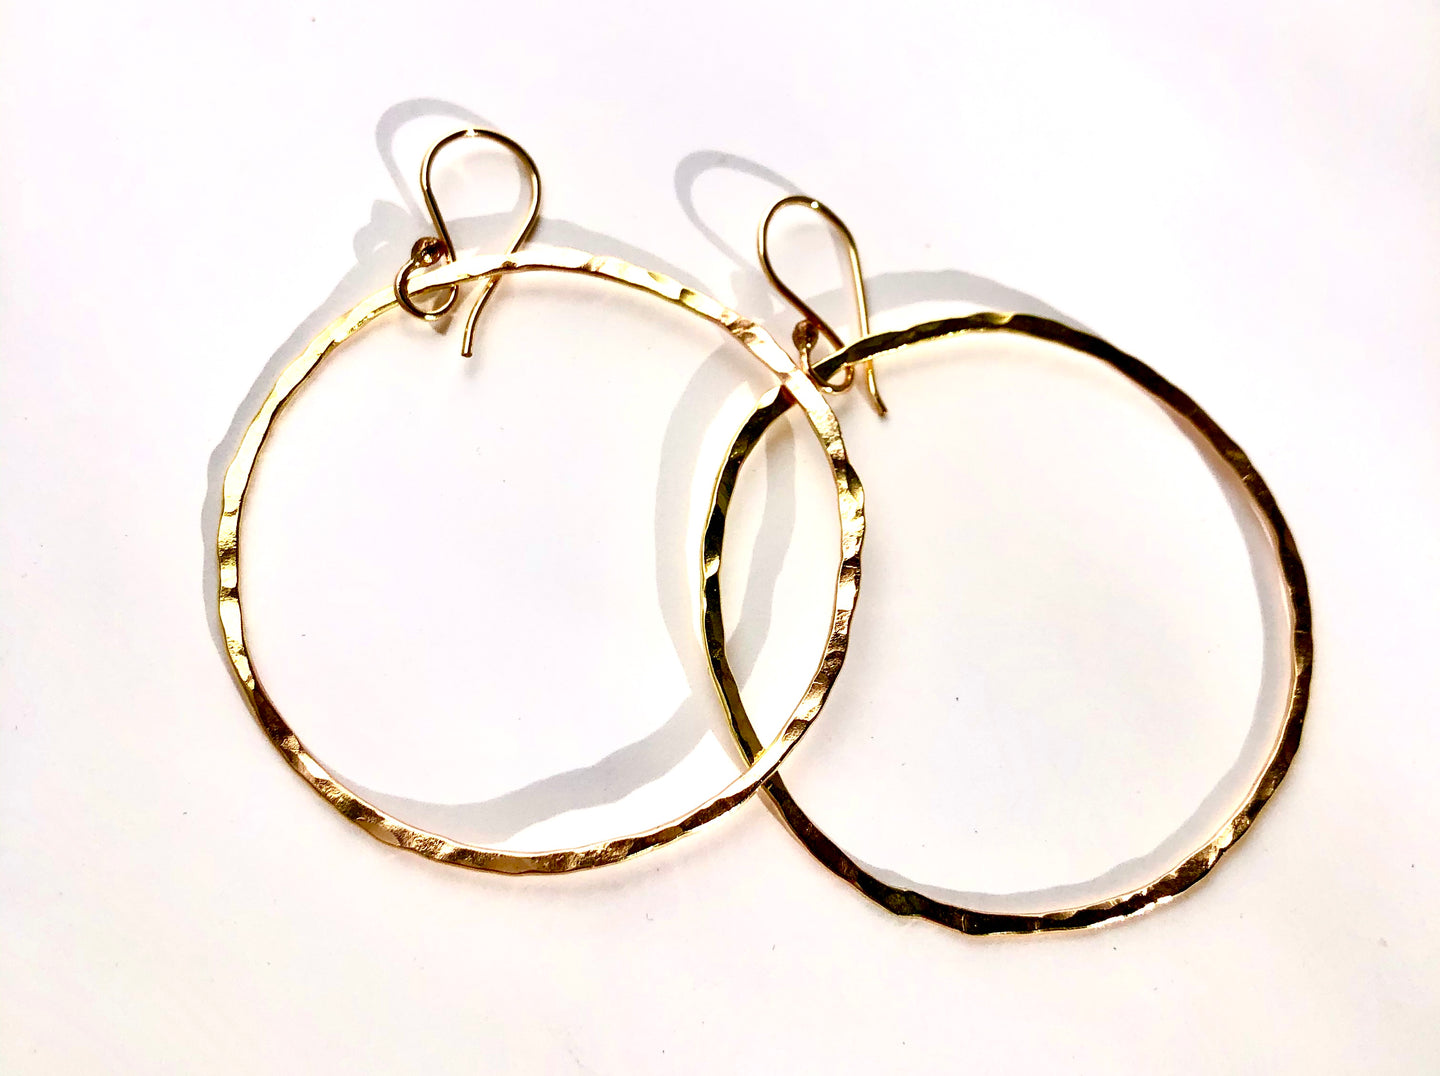 Halo Hoops - gold filled